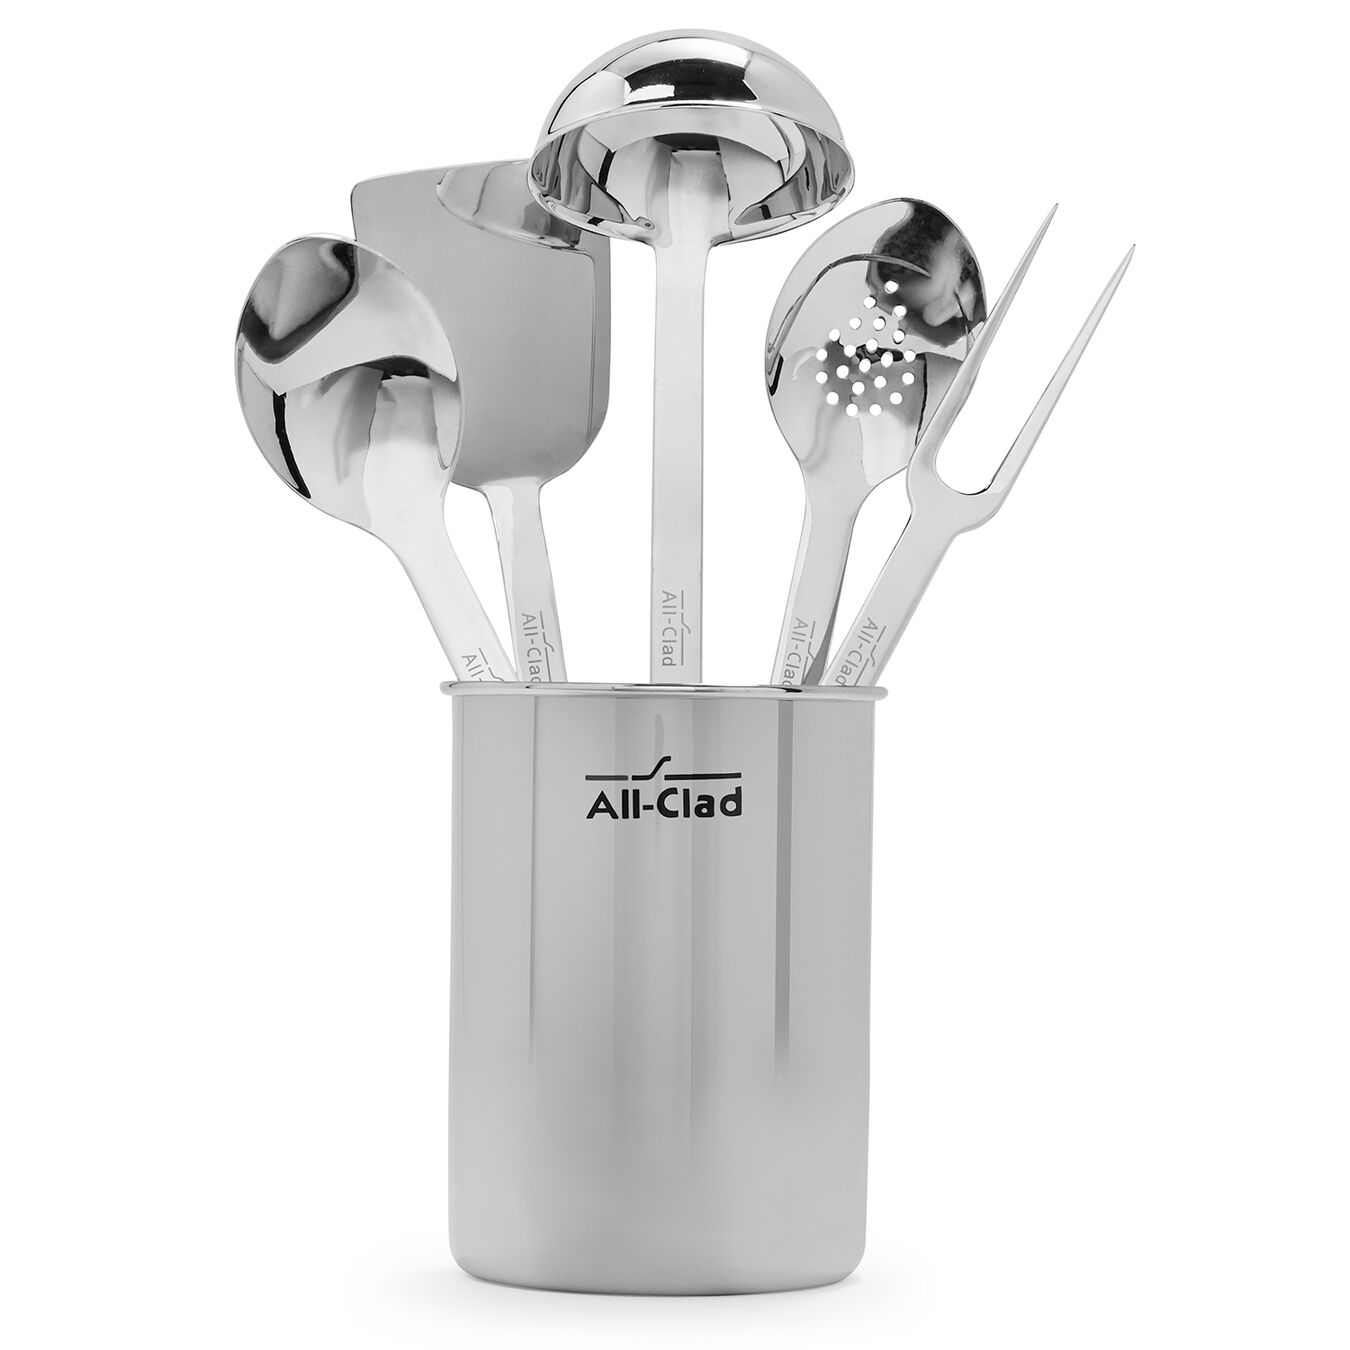 Choice of Utensil NWT All-Clad Metalcrafters Stainless Steel Kitchen Utensils